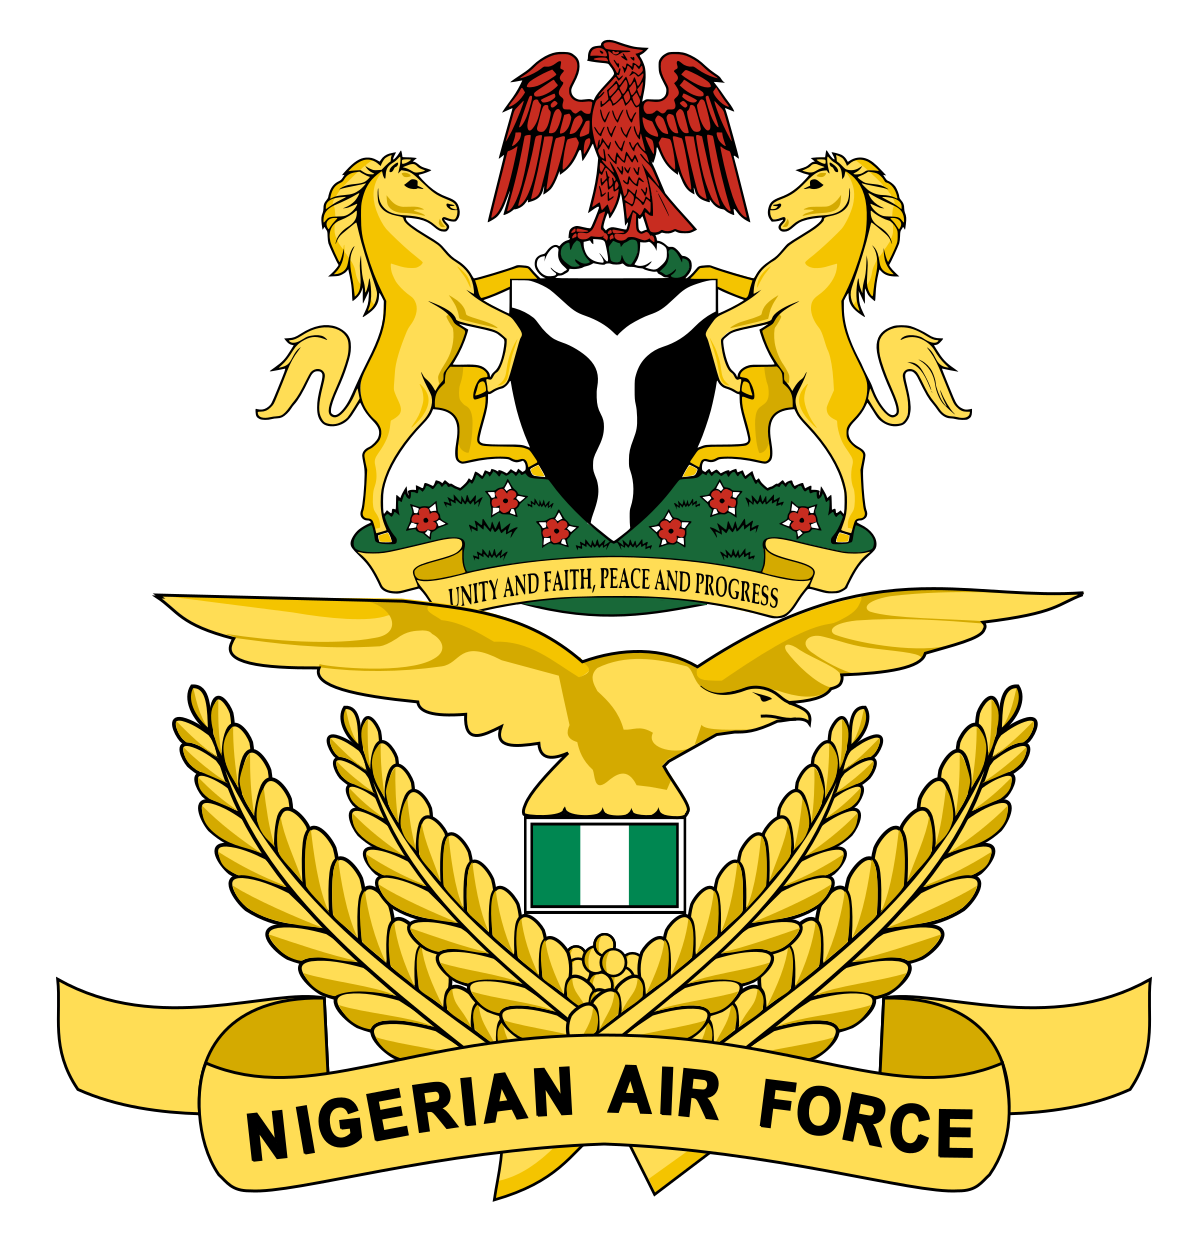 How To Apply For Nigerian Air Force (NAF) Recruitment